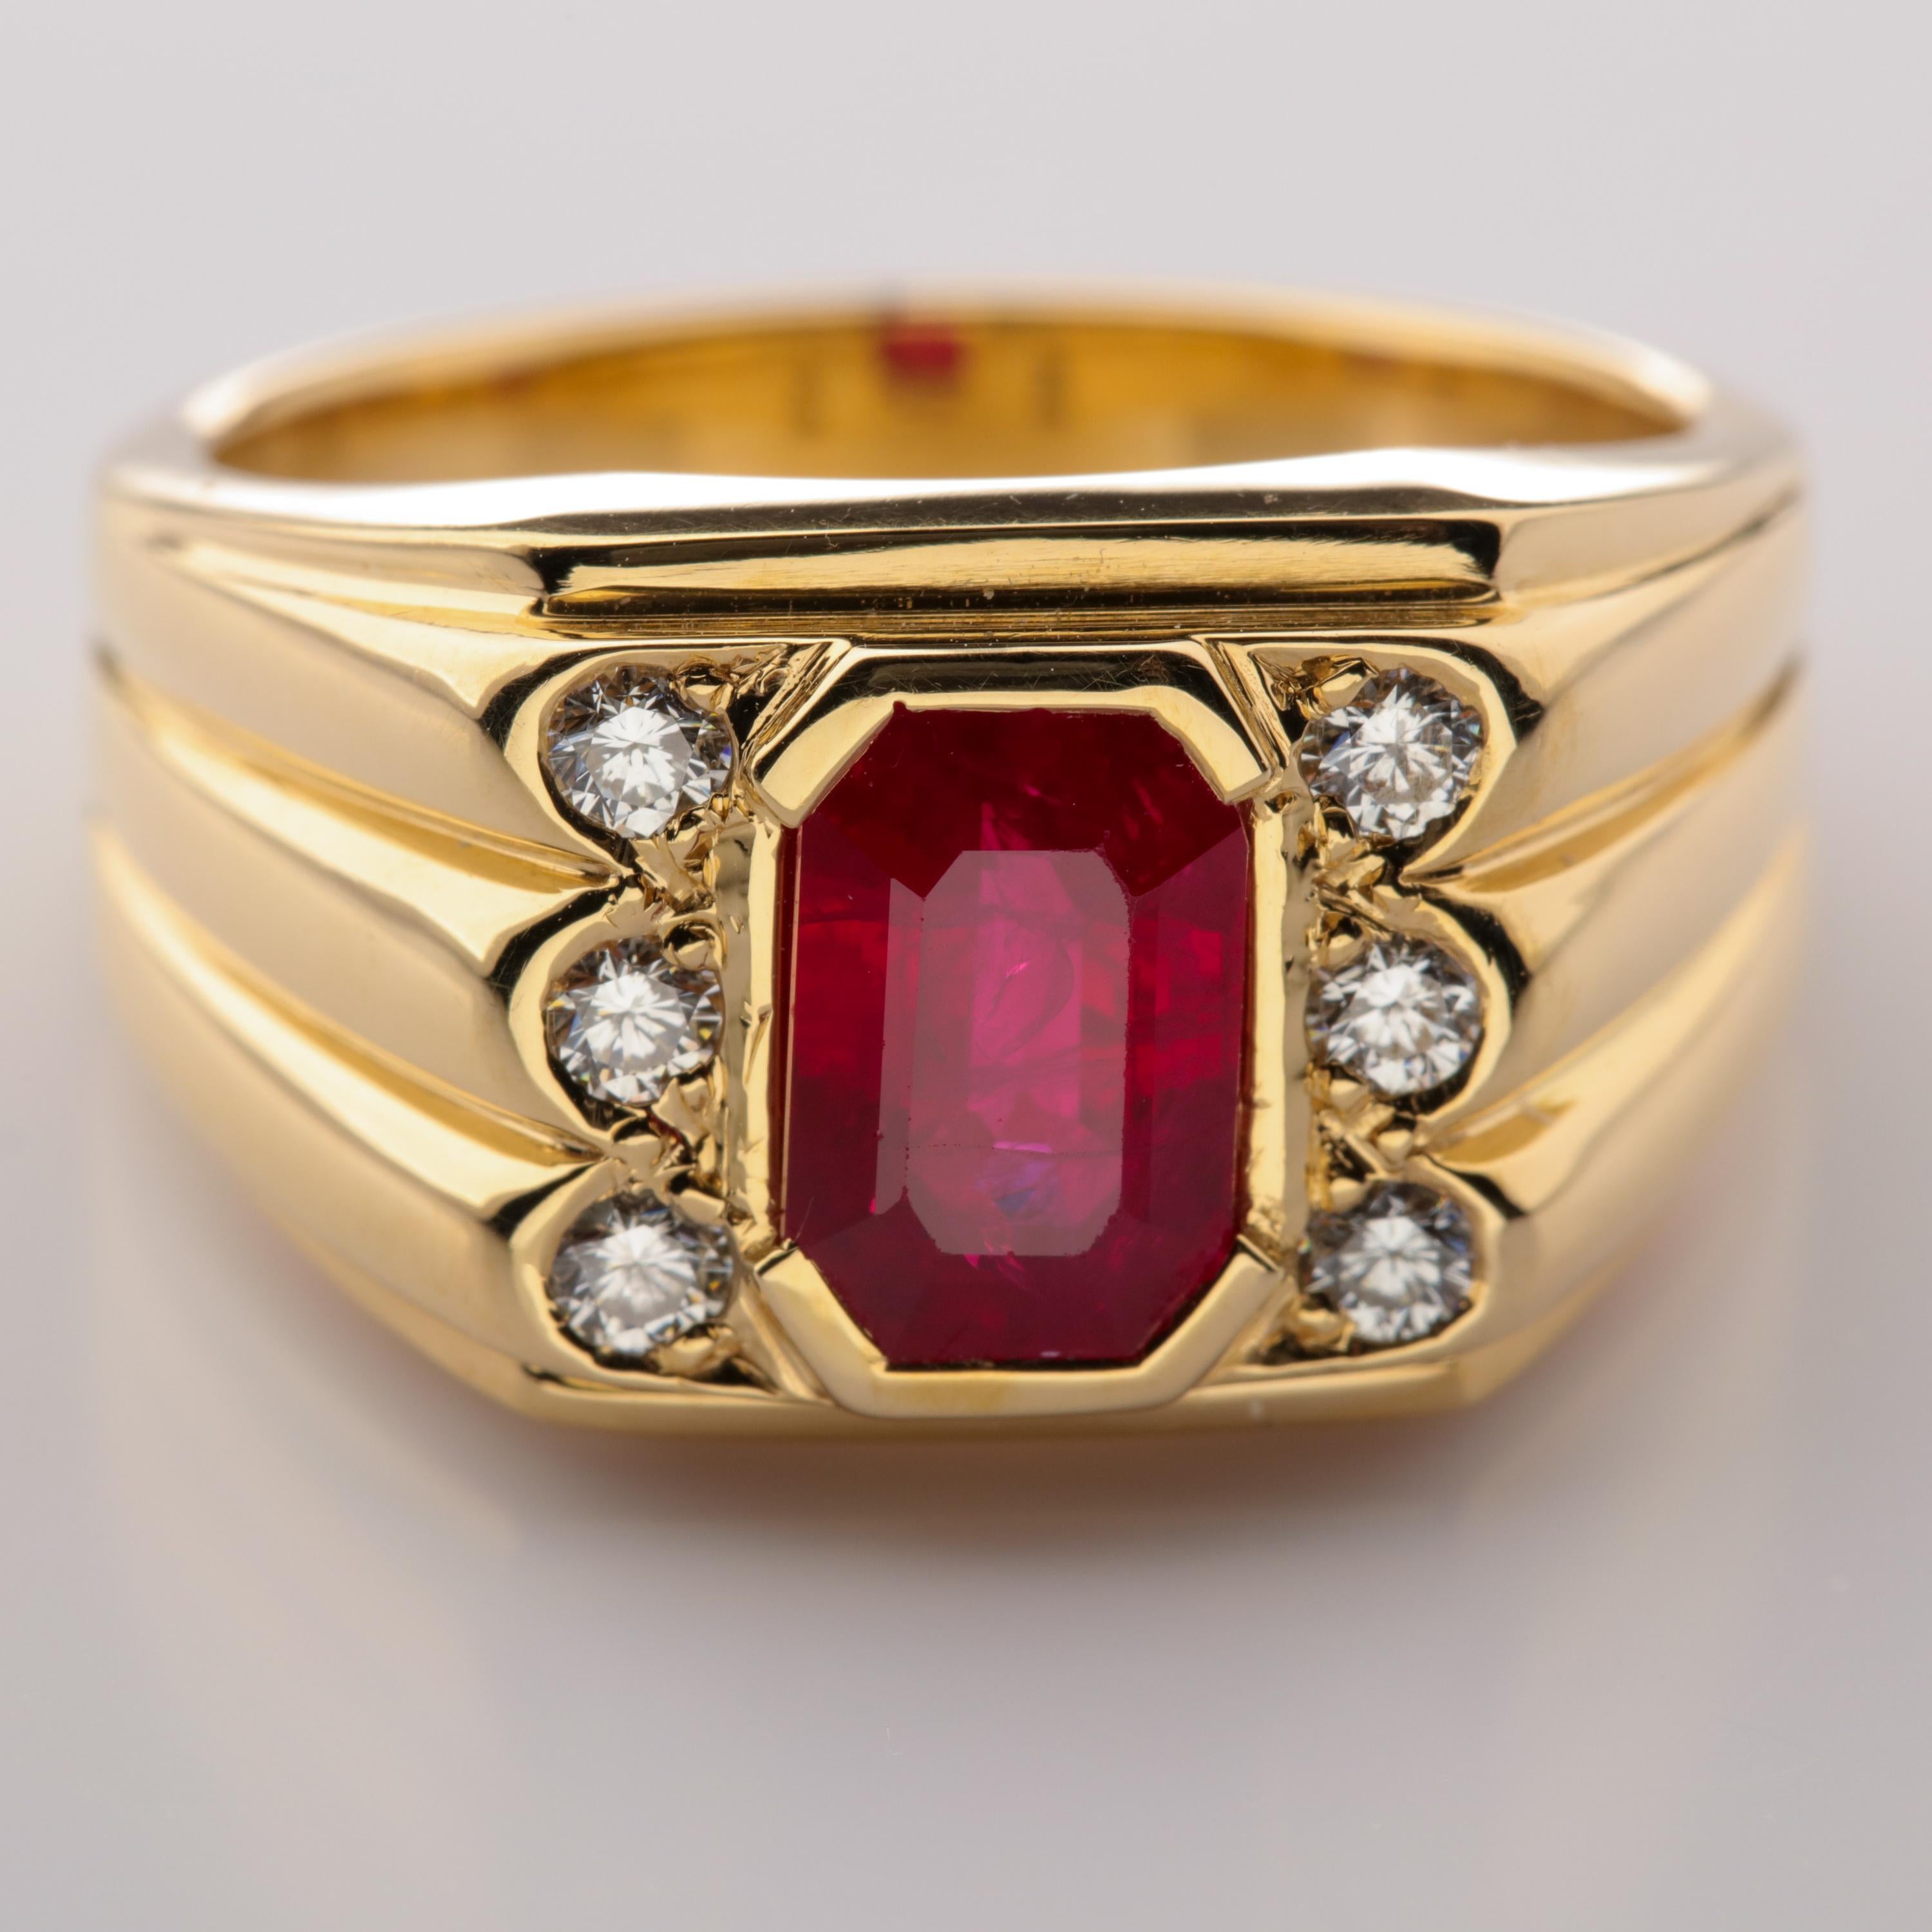 Men's Ruby and Diamond Ring GIA Certified as 